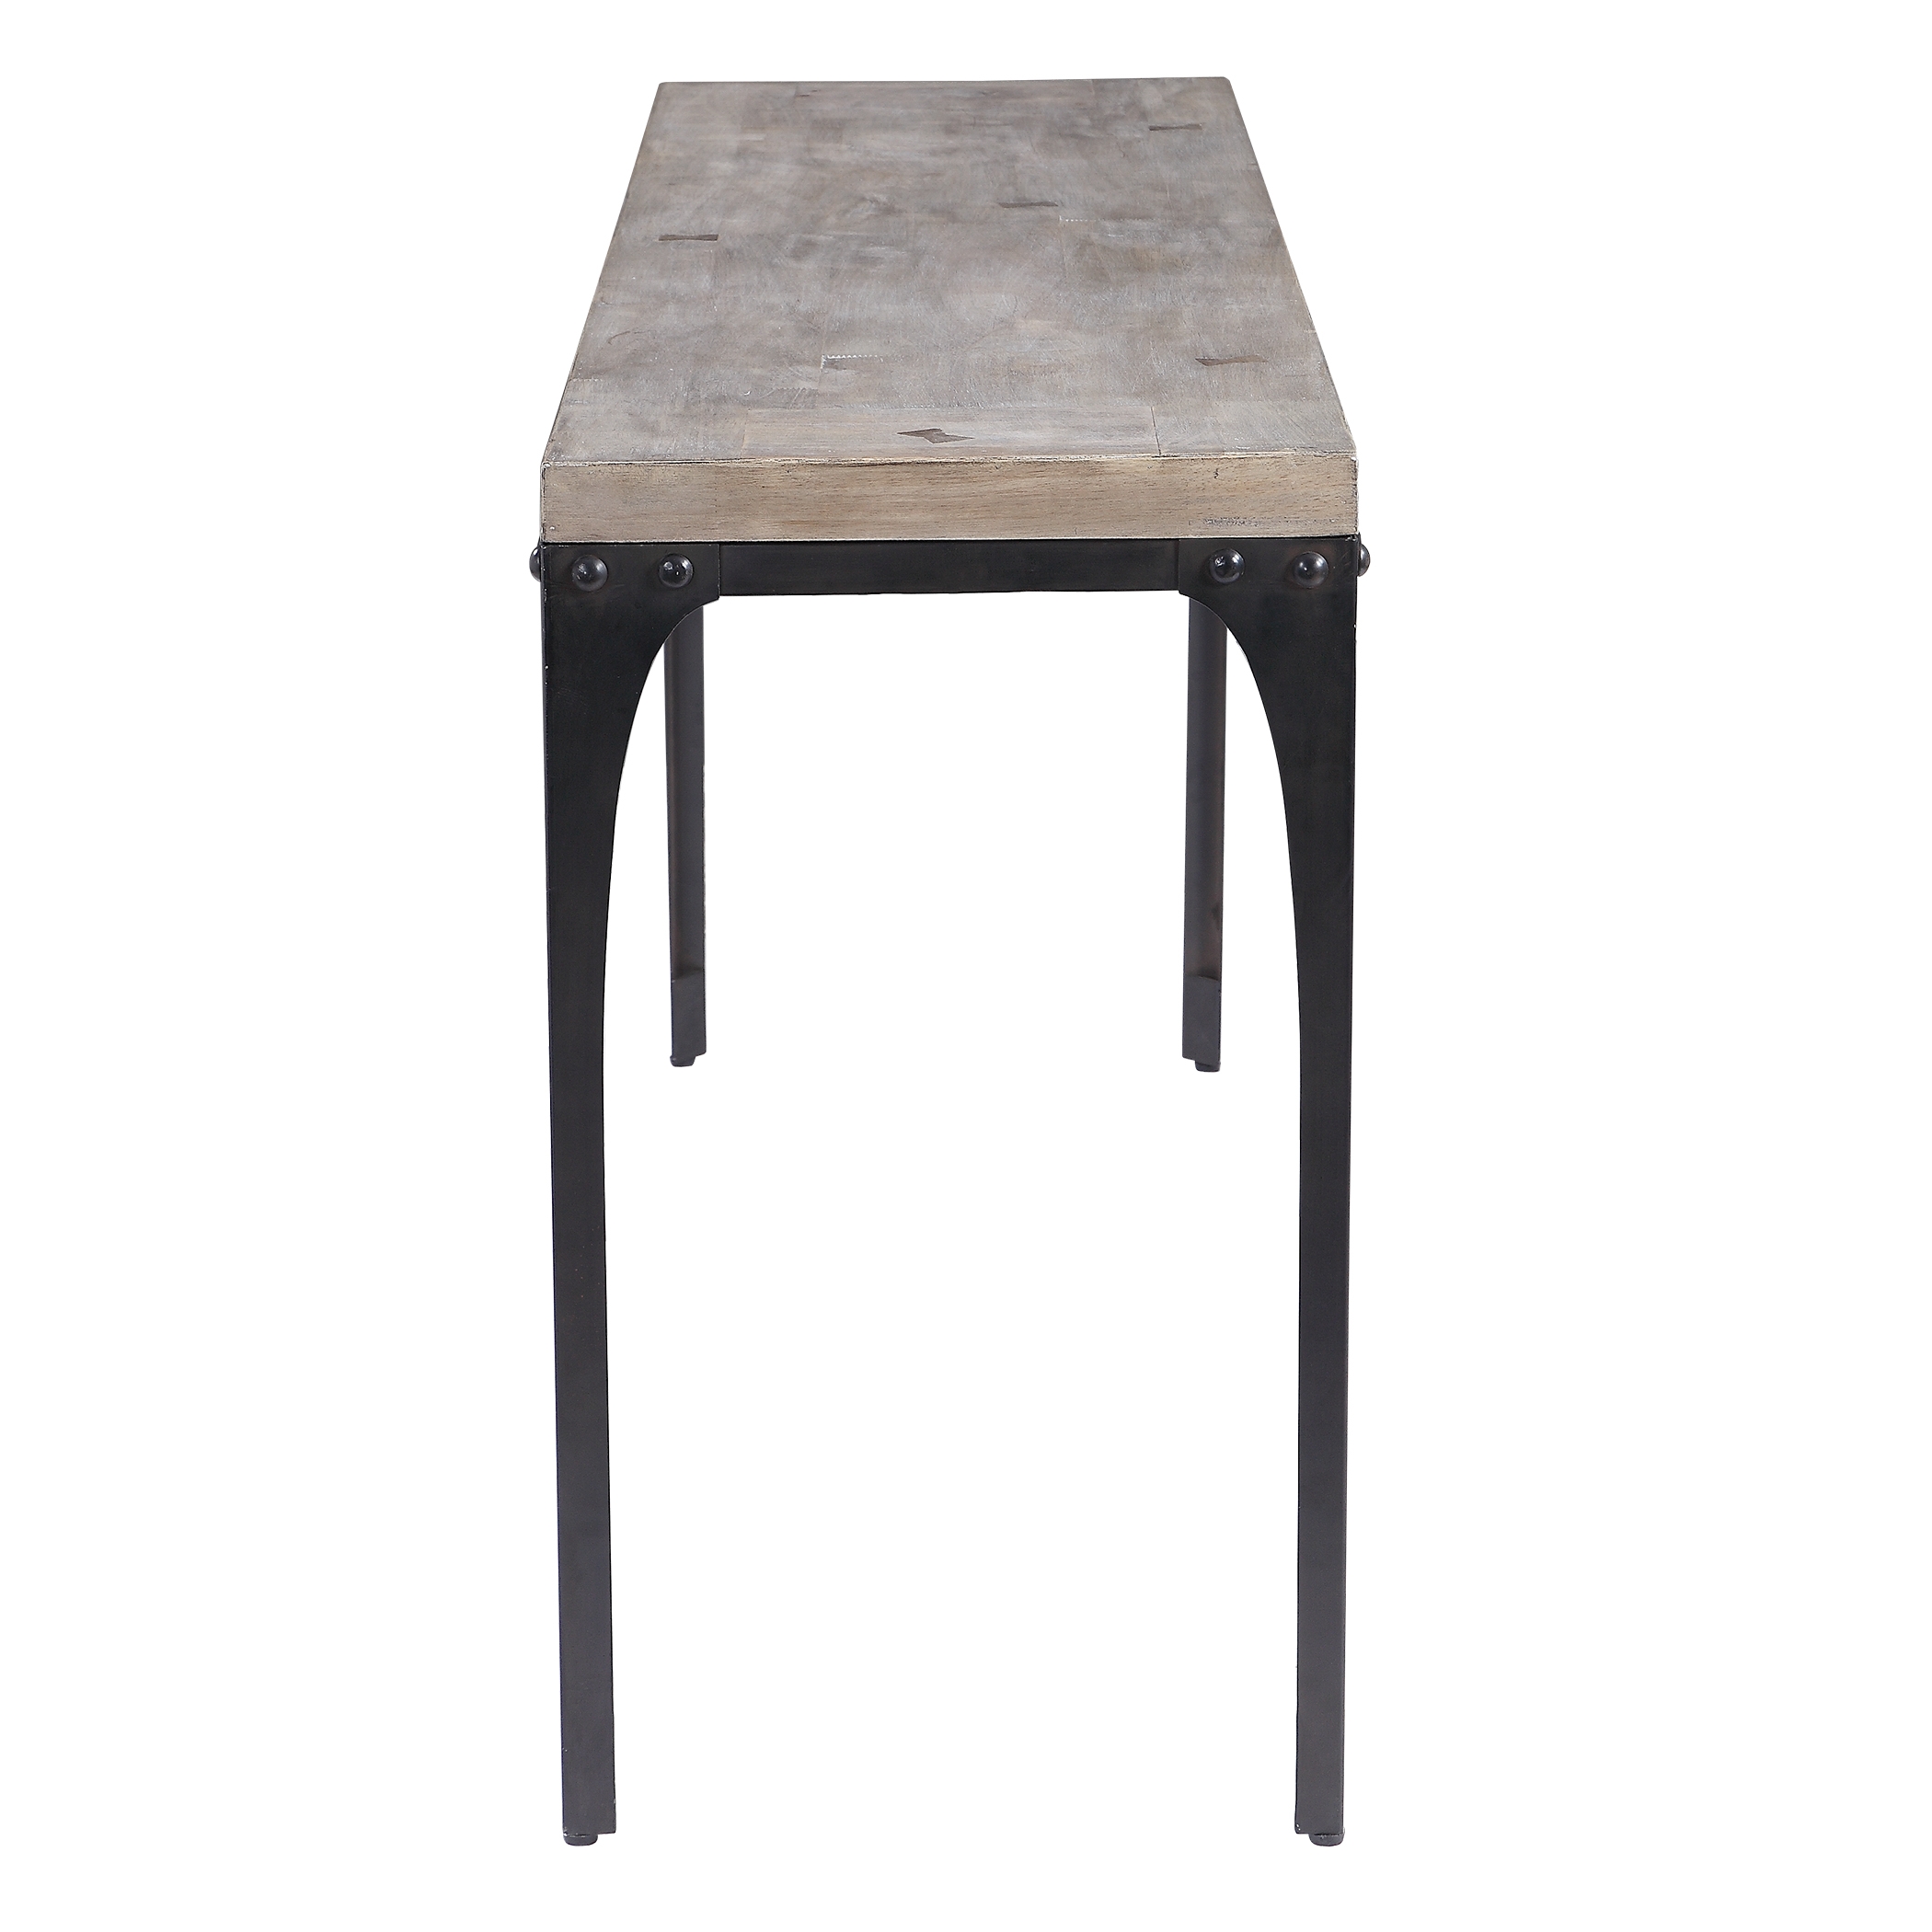 Blaylock Industrial Console Table - Image 4